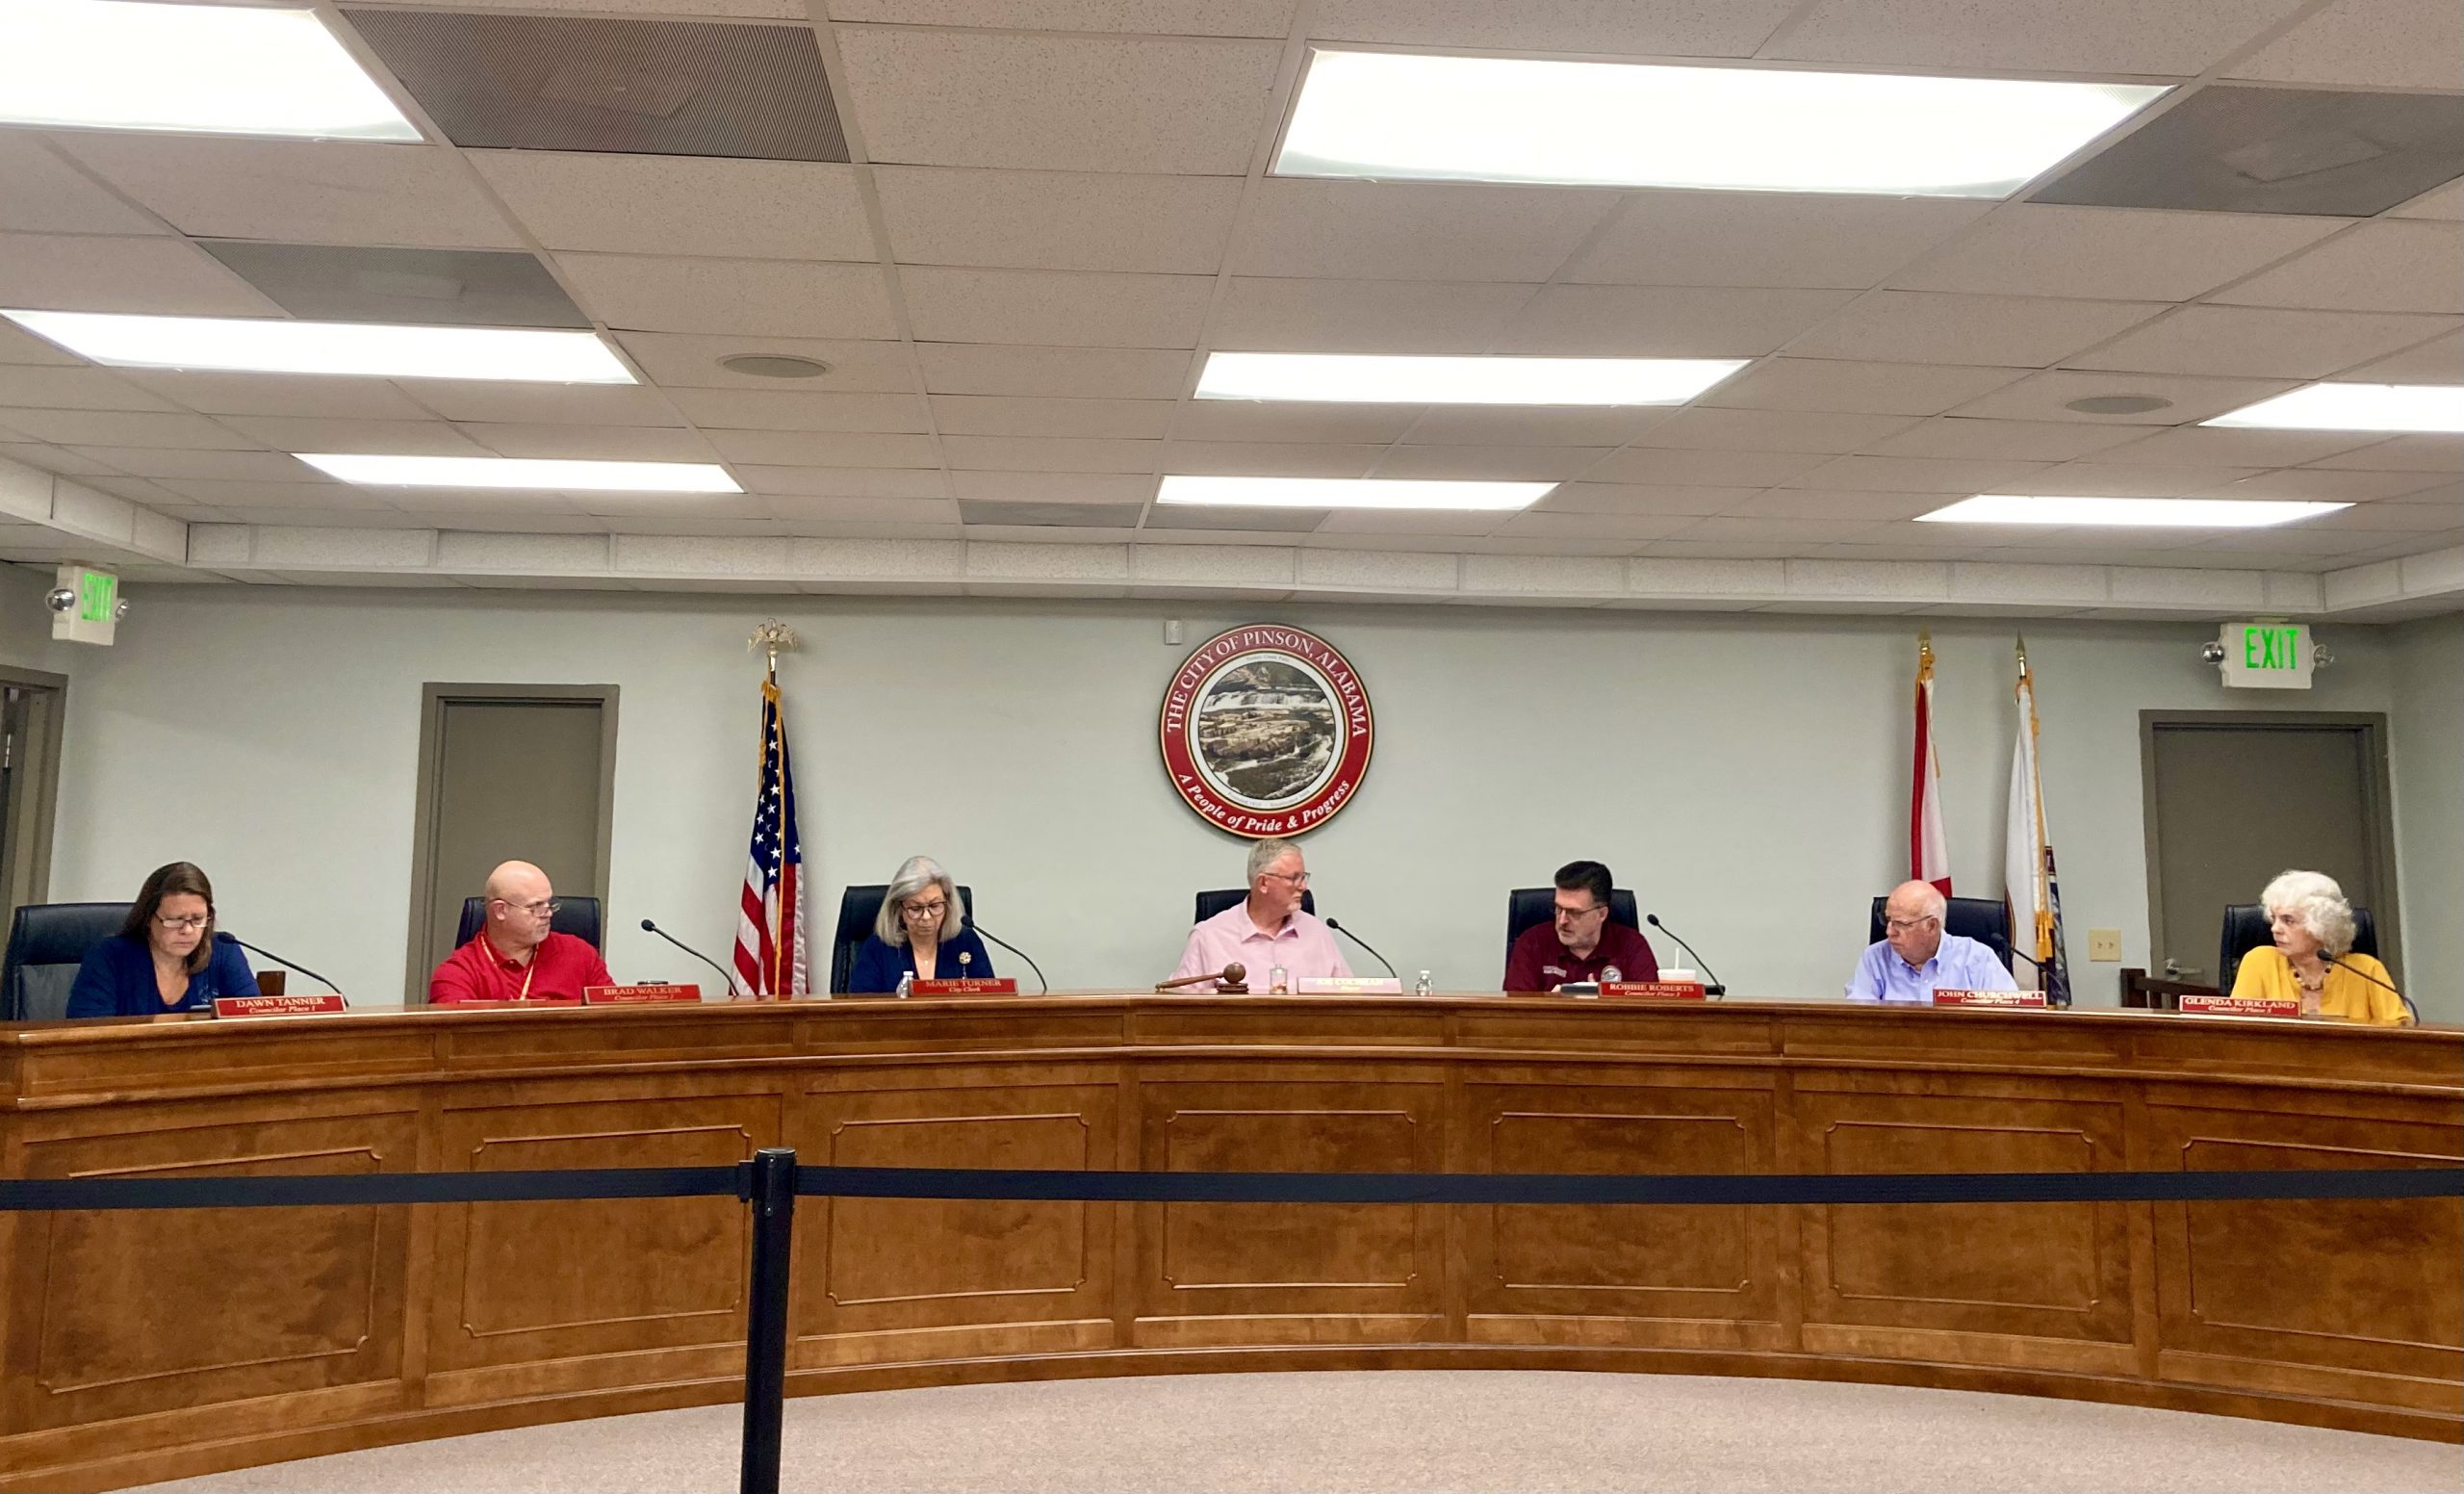 Pinson council tables premium pay resolution a second time, mayor addresses public concerns over city spending